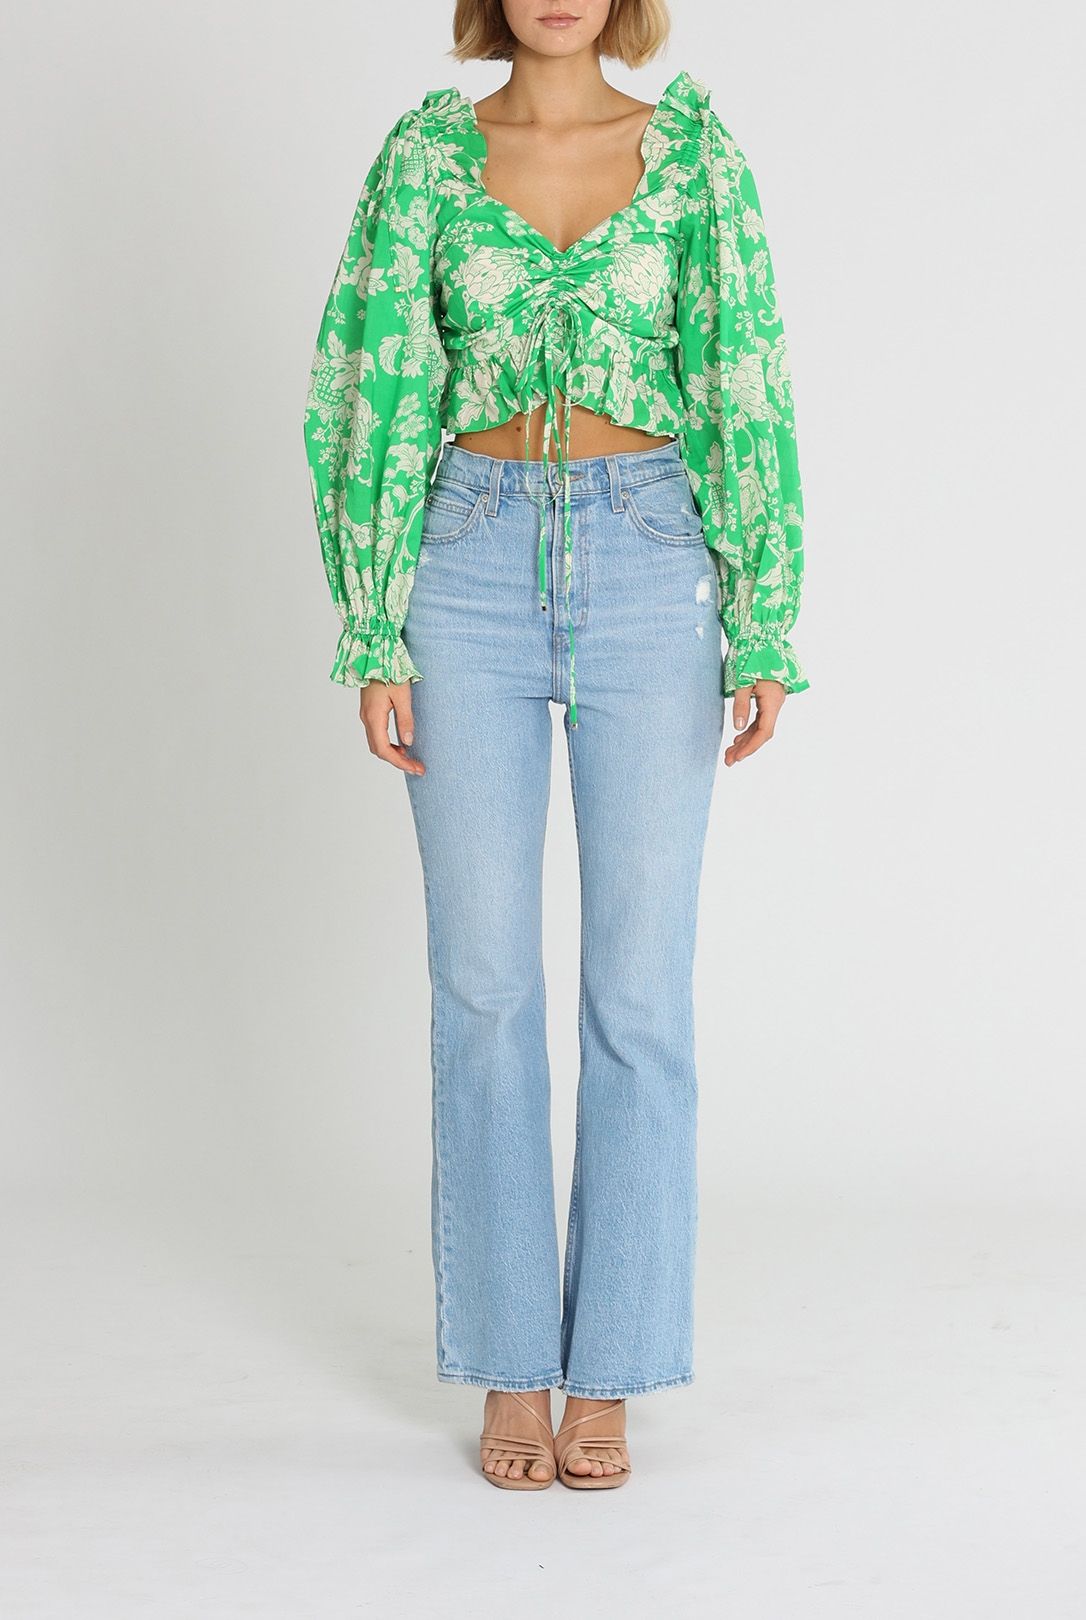 Alice McCall Mary Anne Crop Top Green